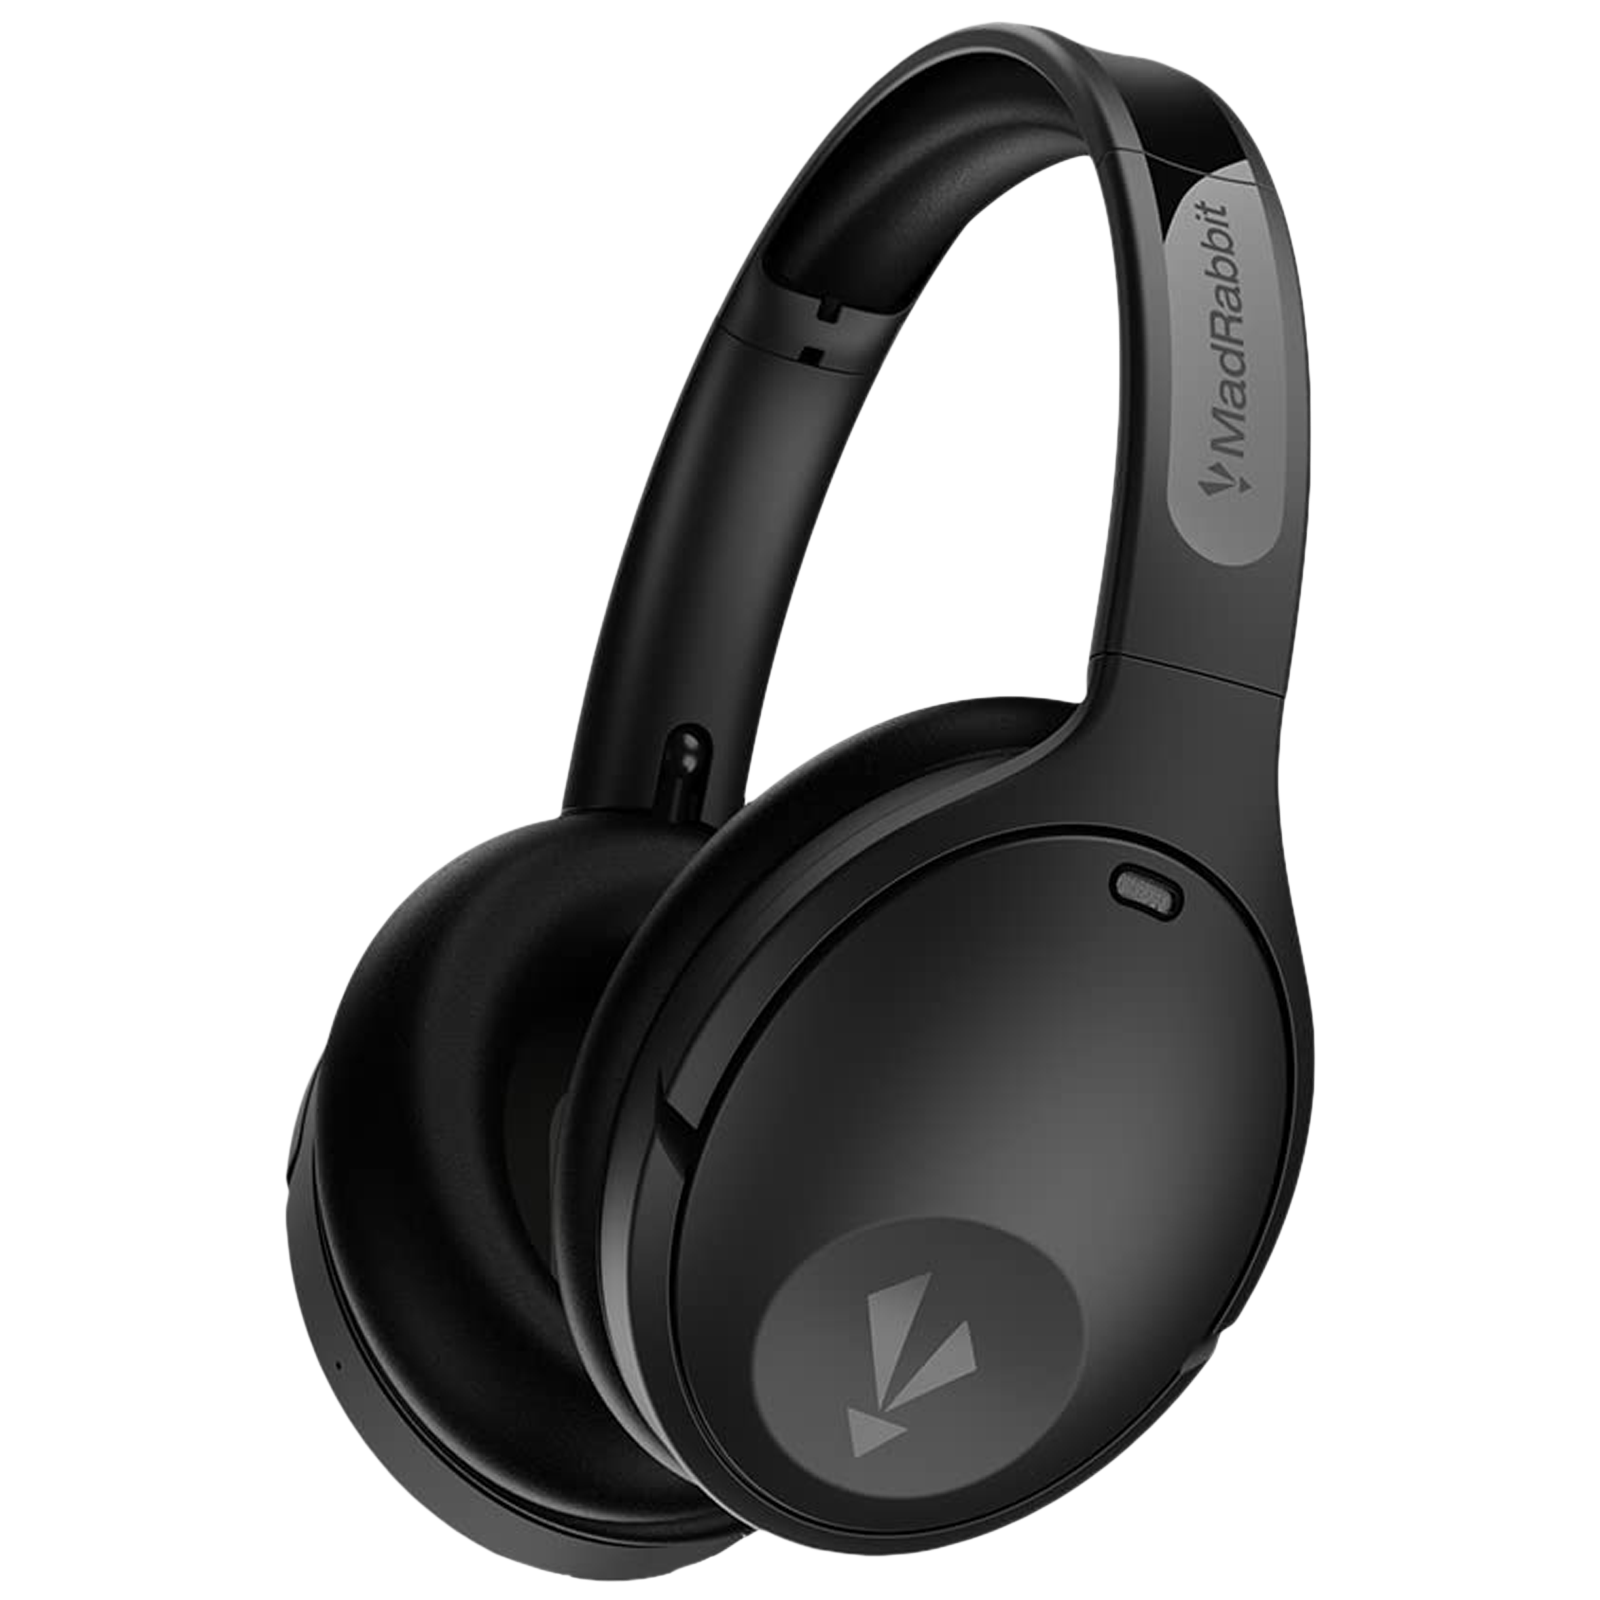 MadRabbit 8059 Bluetooth Headphone with Mic (Fast Charging, Over Ear, Black)